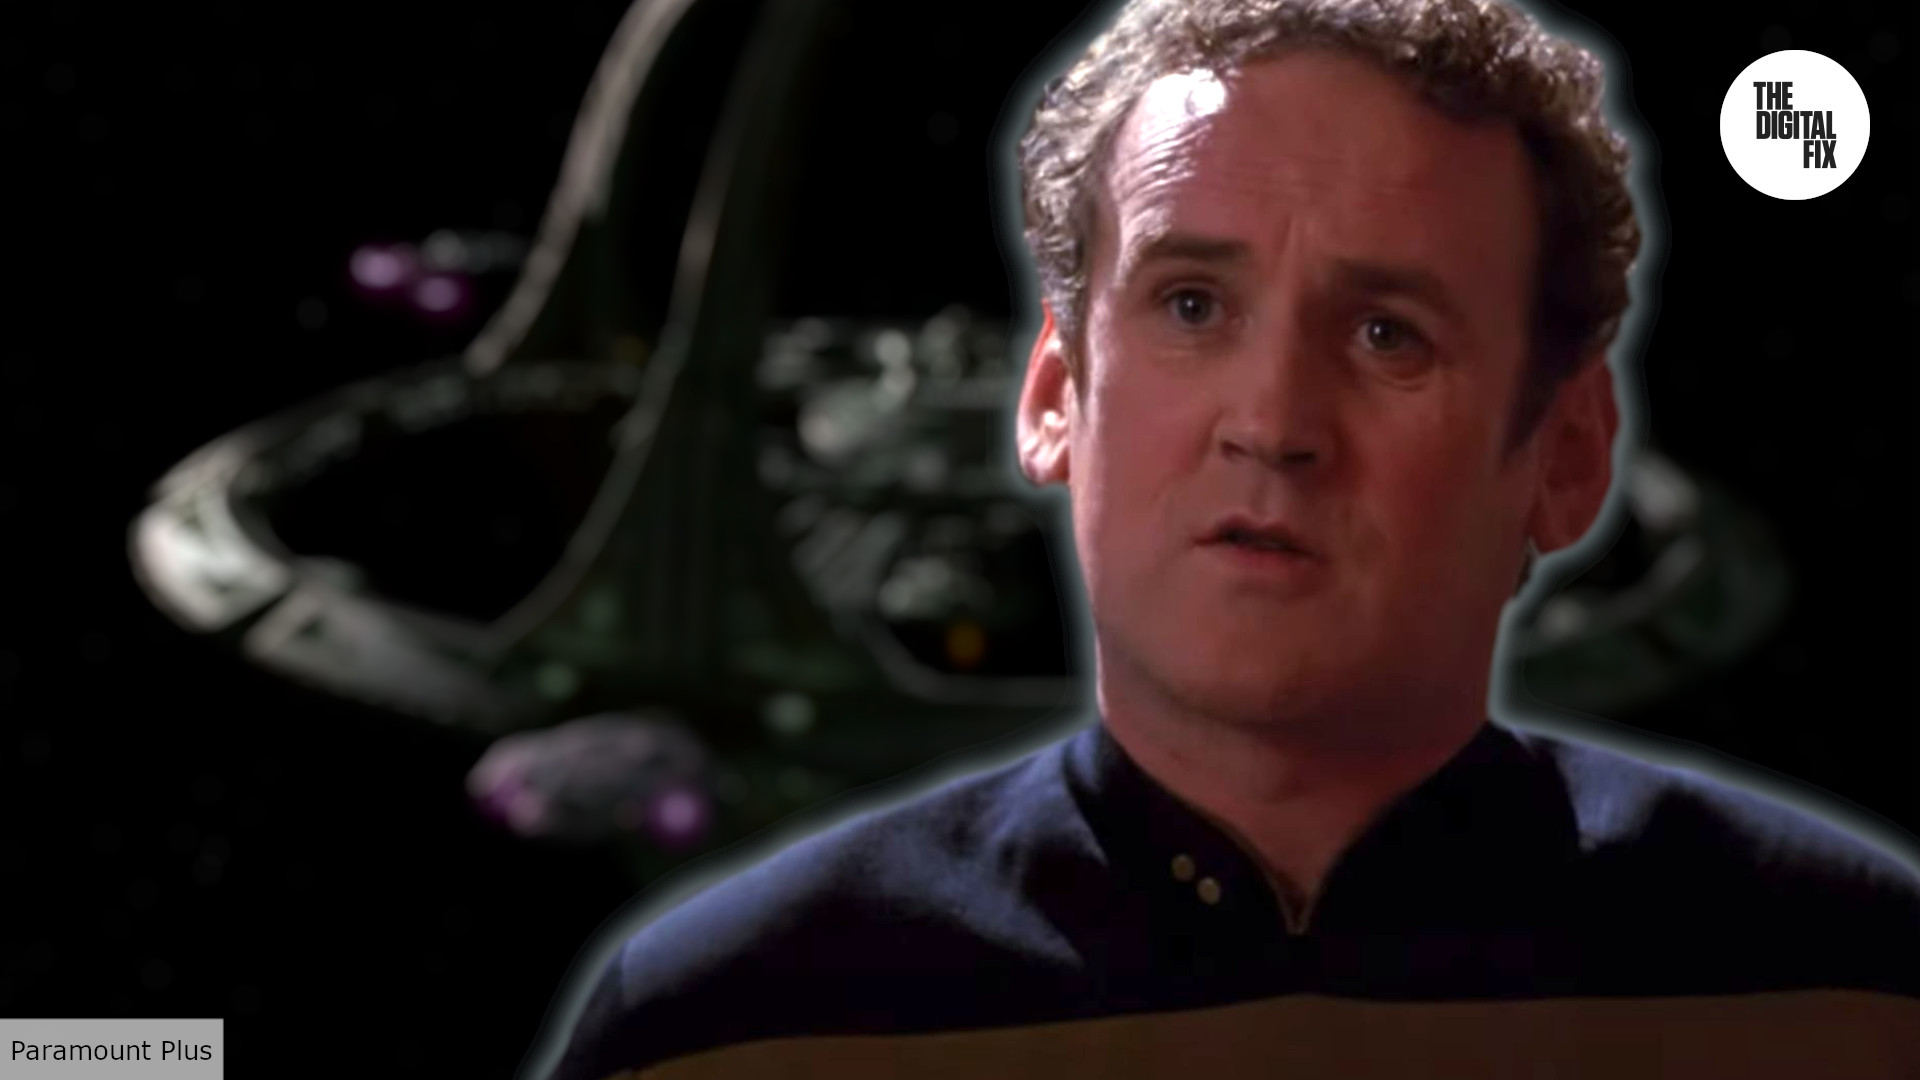 Colm Meaney was actually happy a DS9 Star Trek movie never got made